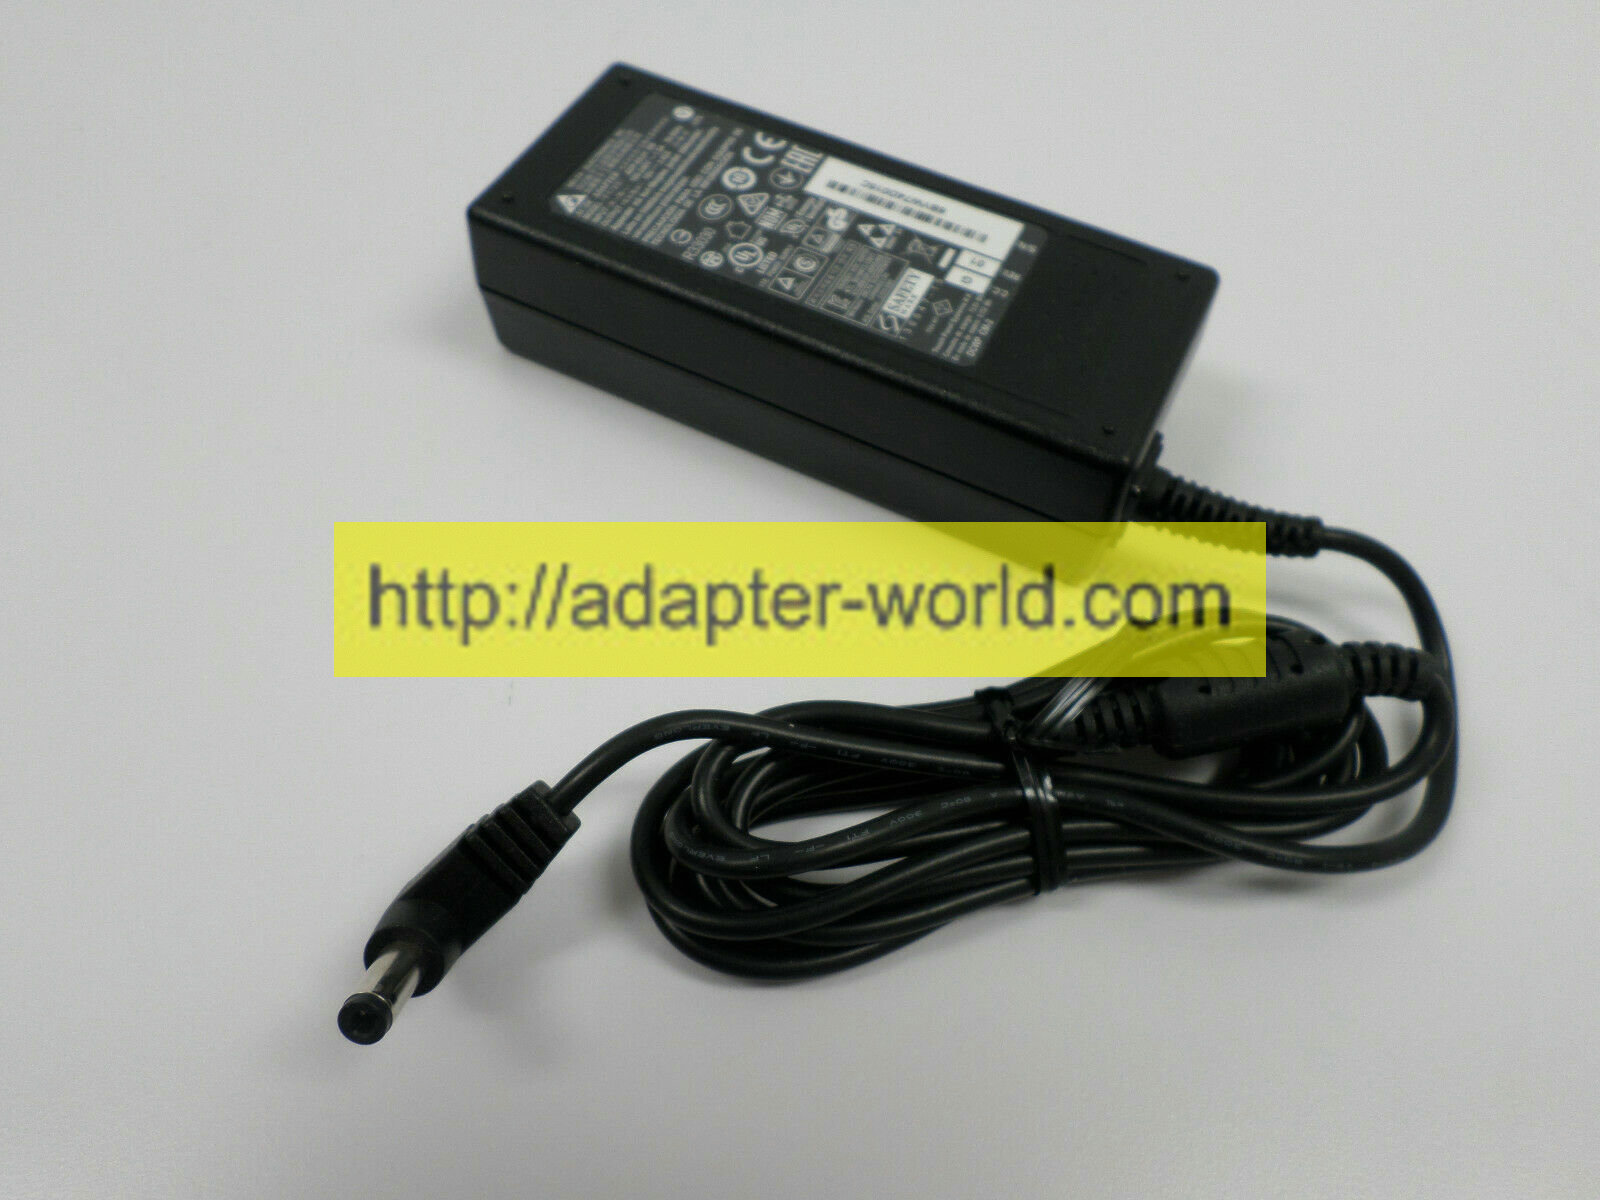 *100% Brand NEW* DELTA 19V 3.42A ADP-65JH HB ELECTRONICS AC/DC POWER ADAPTER - Click Image to Close